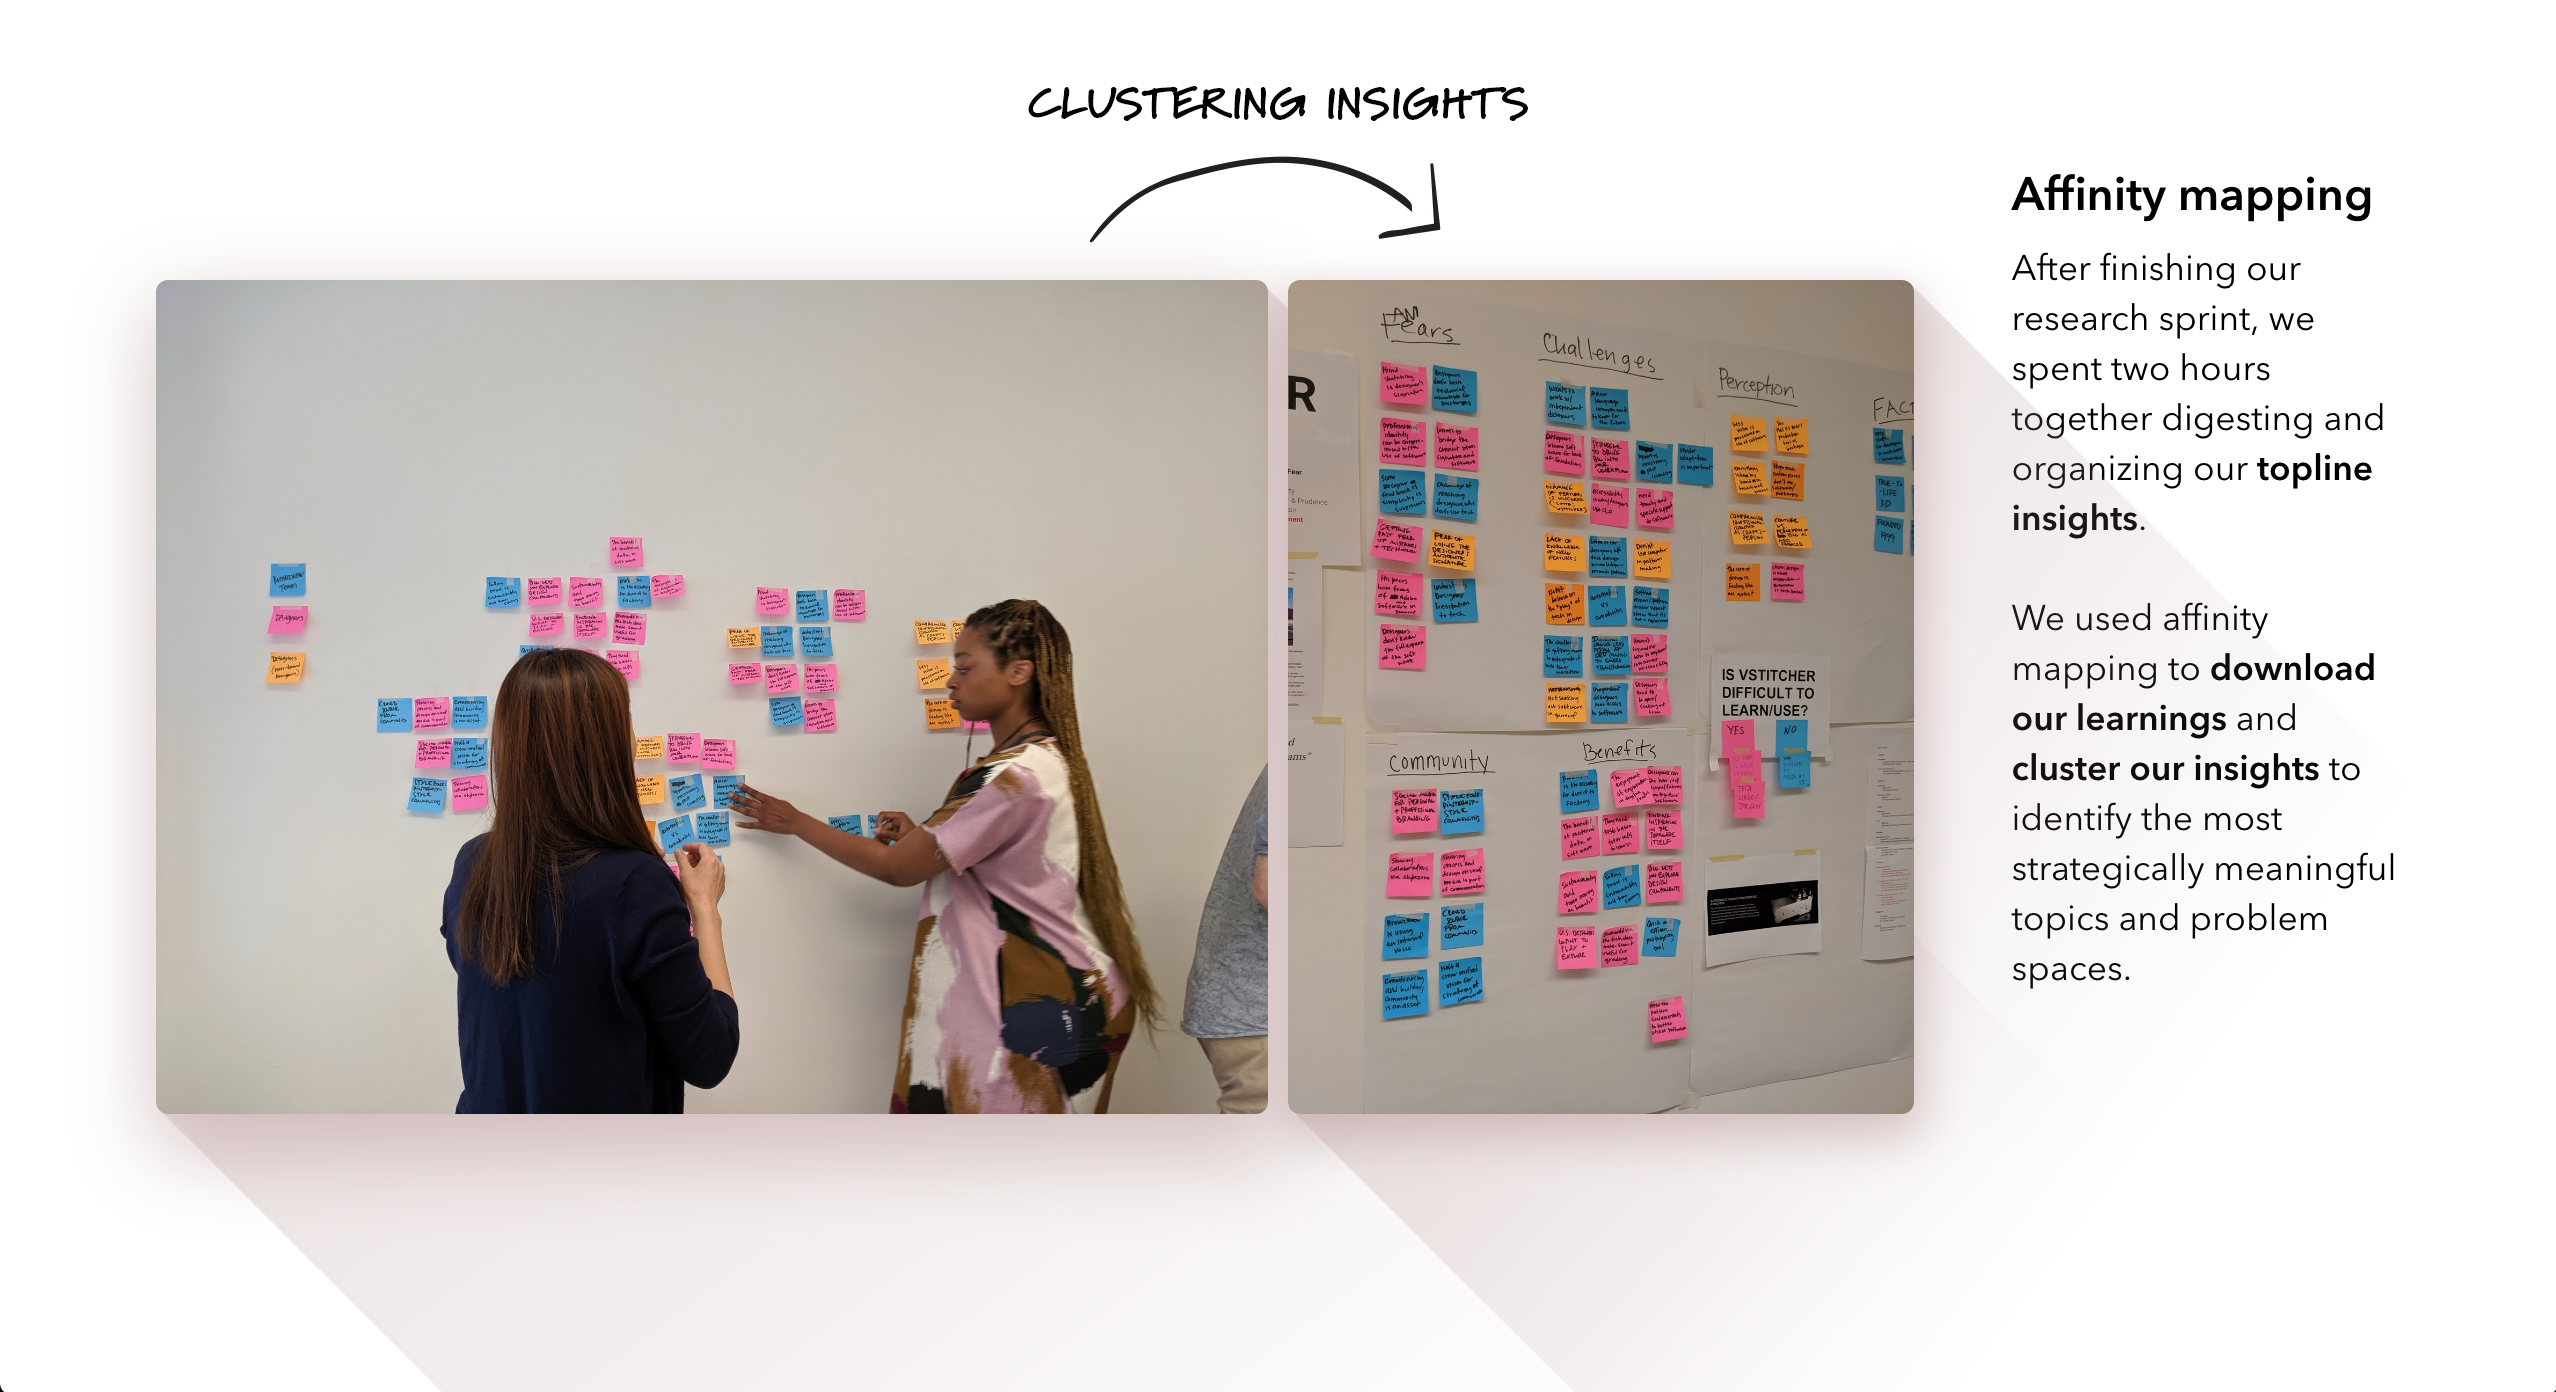 using affinity mapping to cluster insights and generate insight by establishing correlations